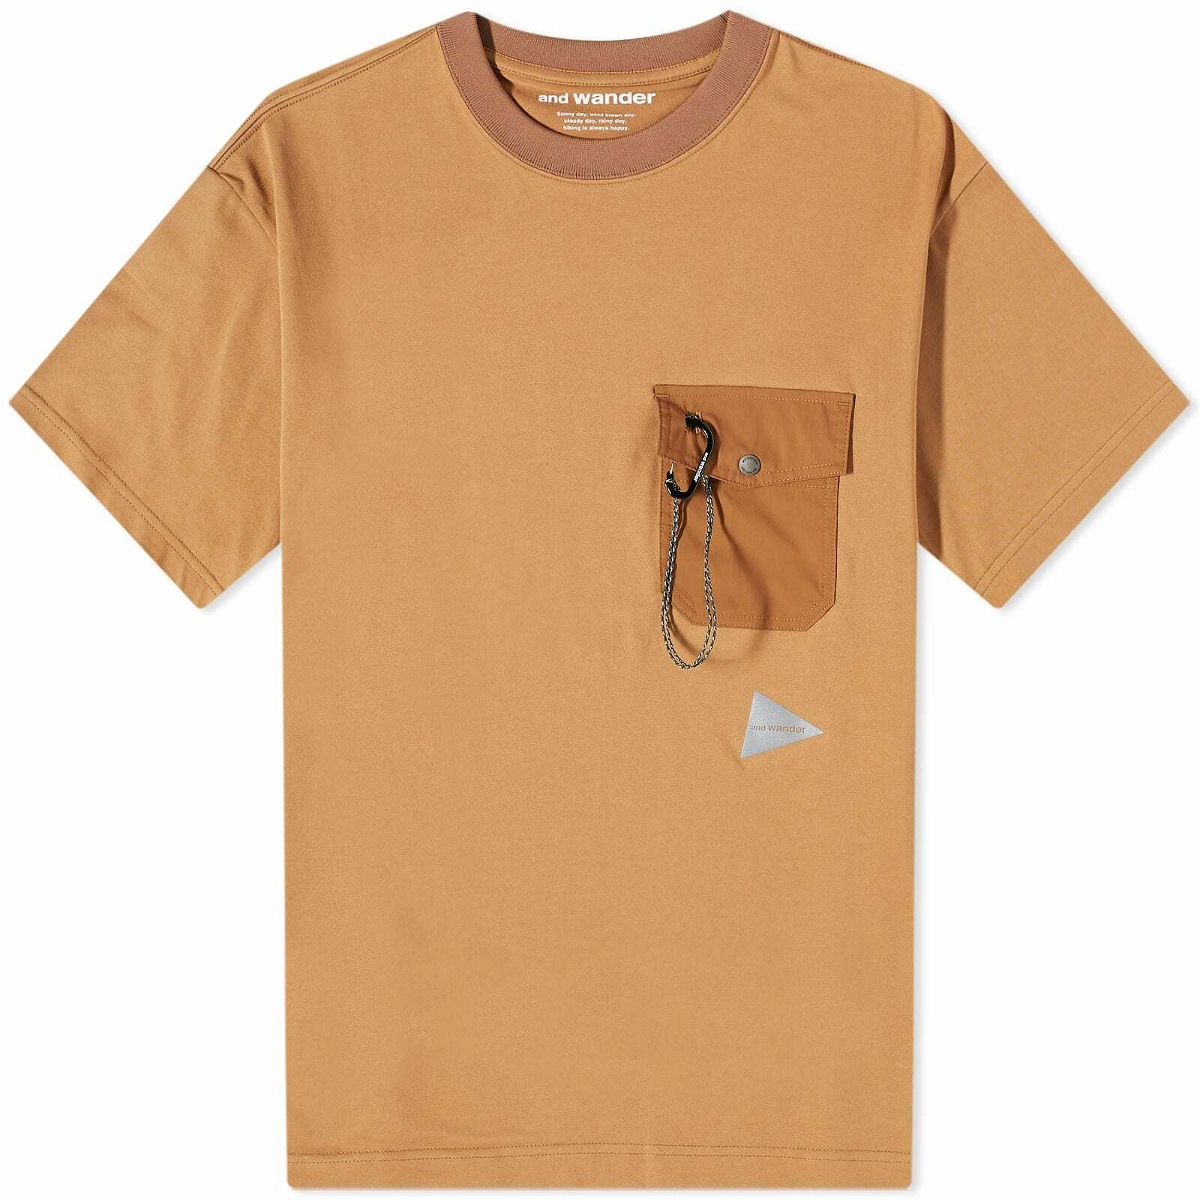 And Wander Men's Pocket T-Shirt in Beige and Wander